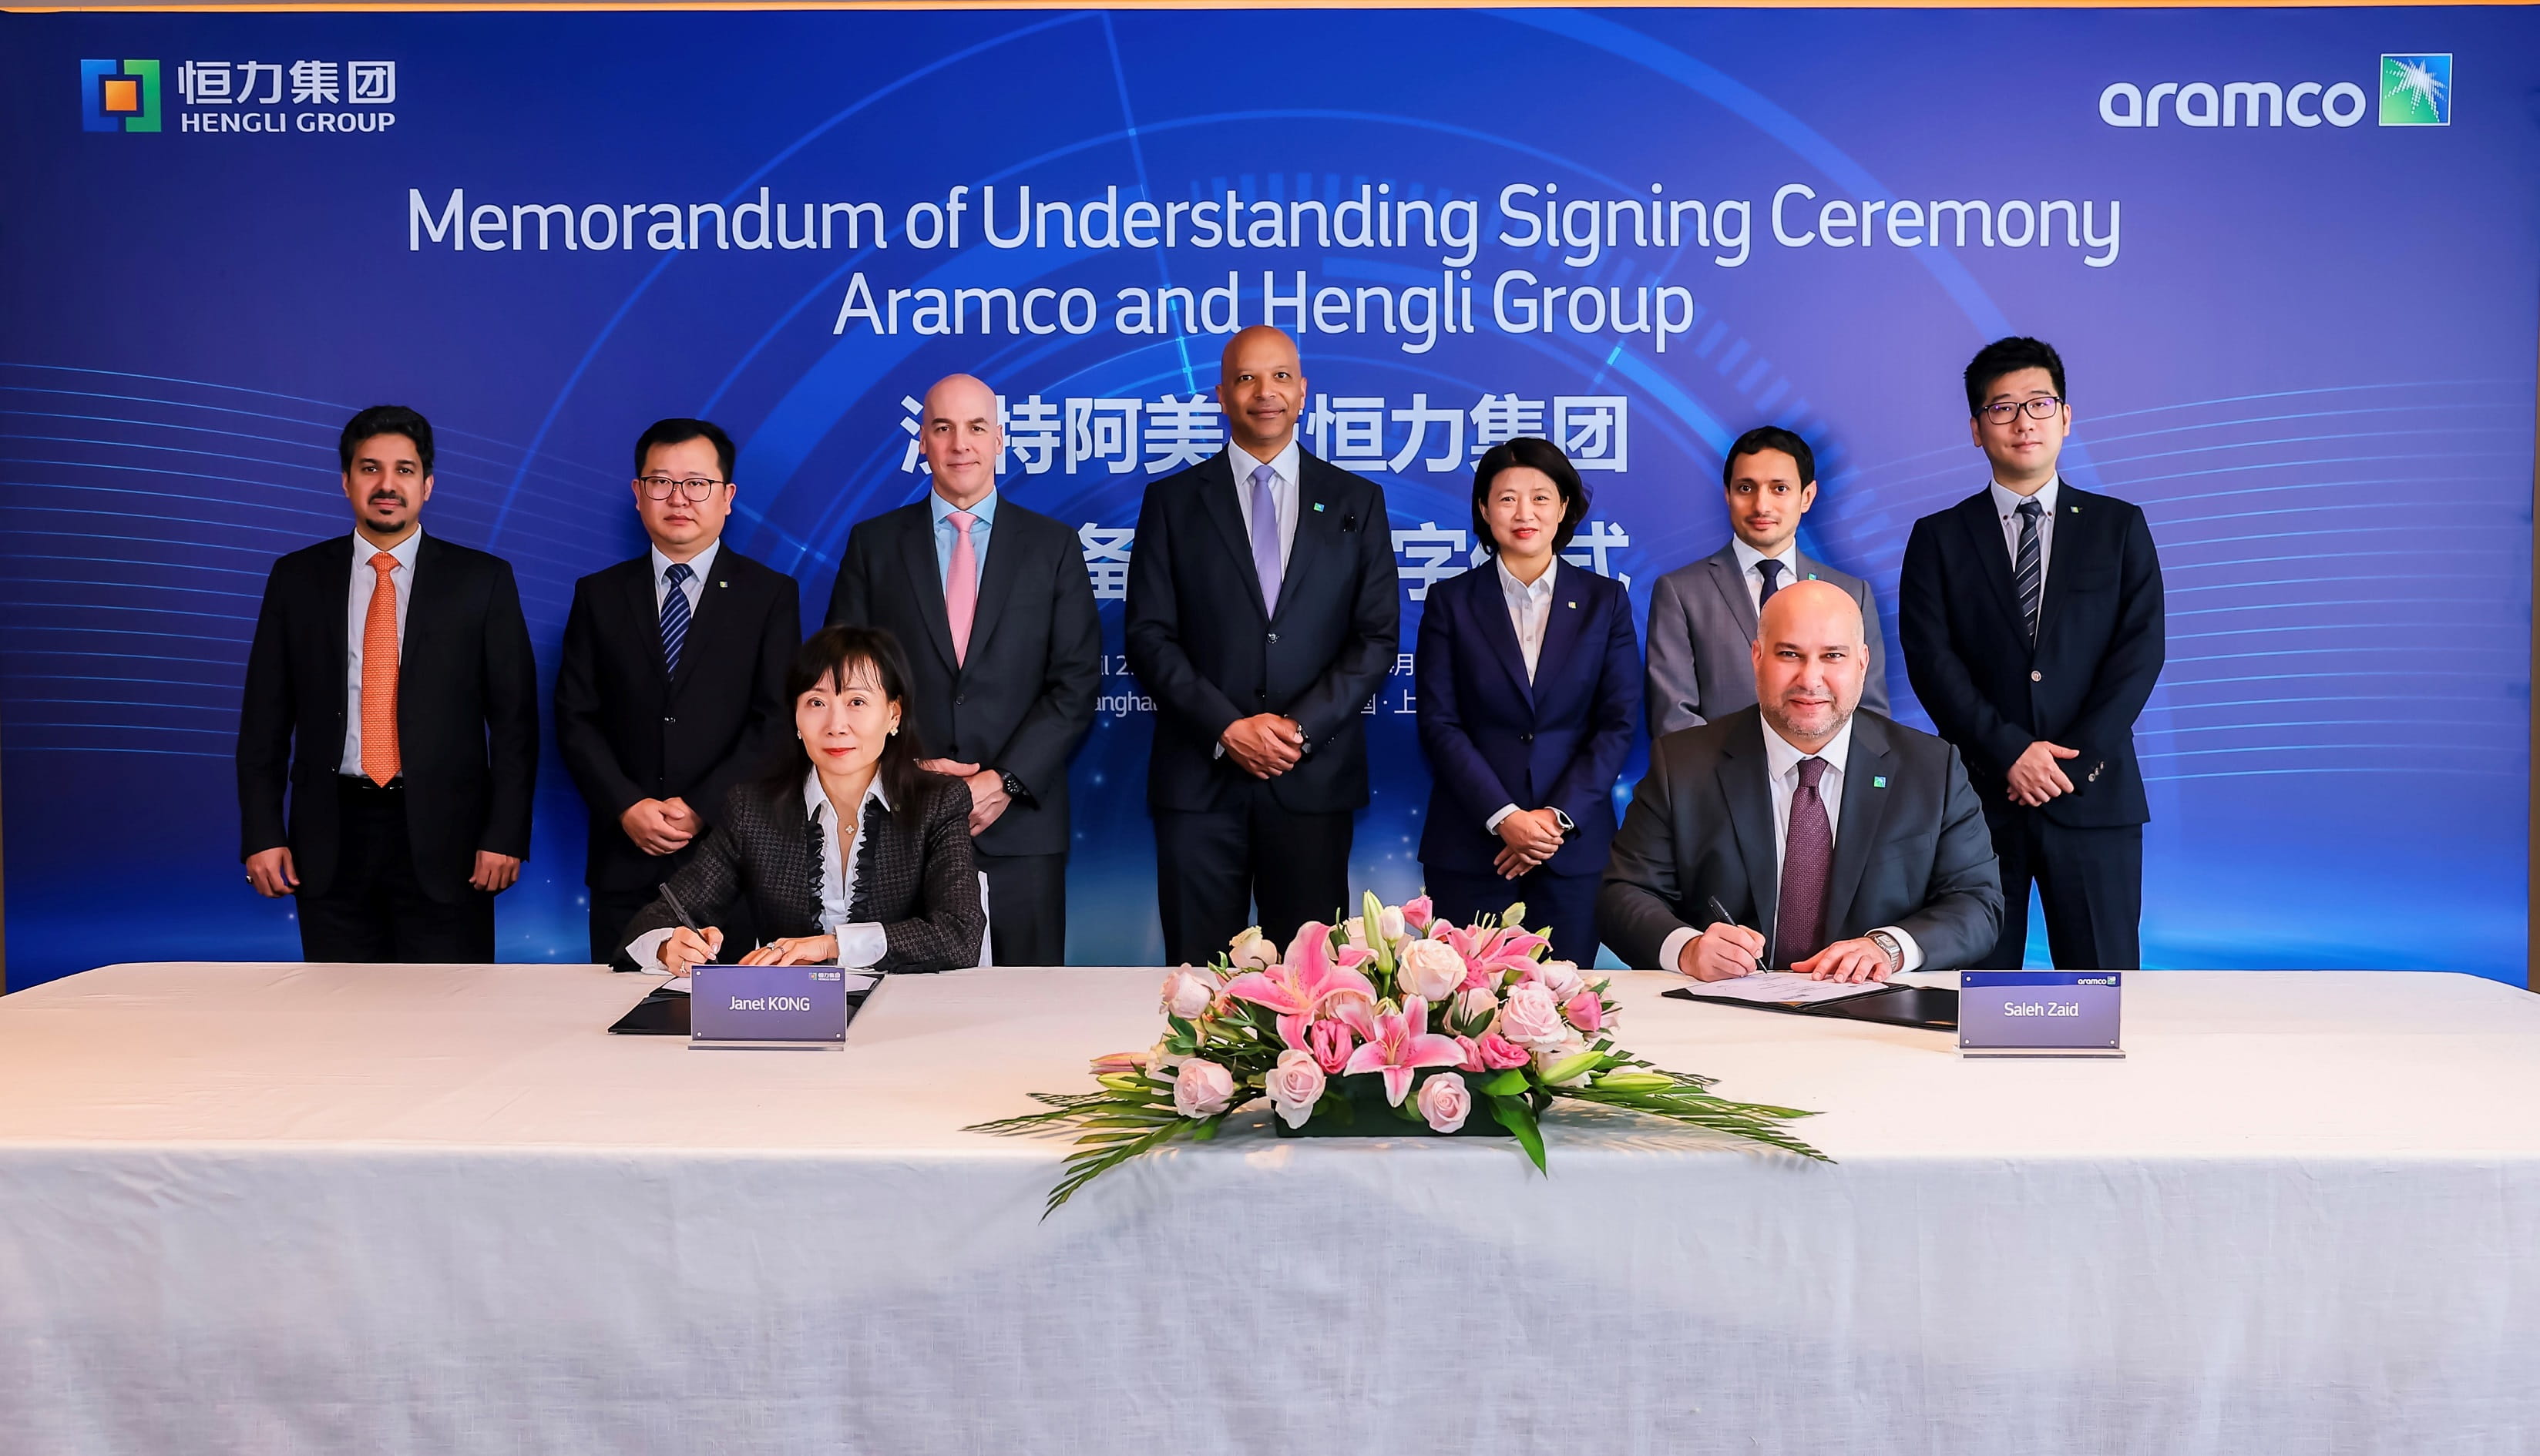 Aramco in talks to acquire 10% stake in Chinese company Hengli Petrochemical